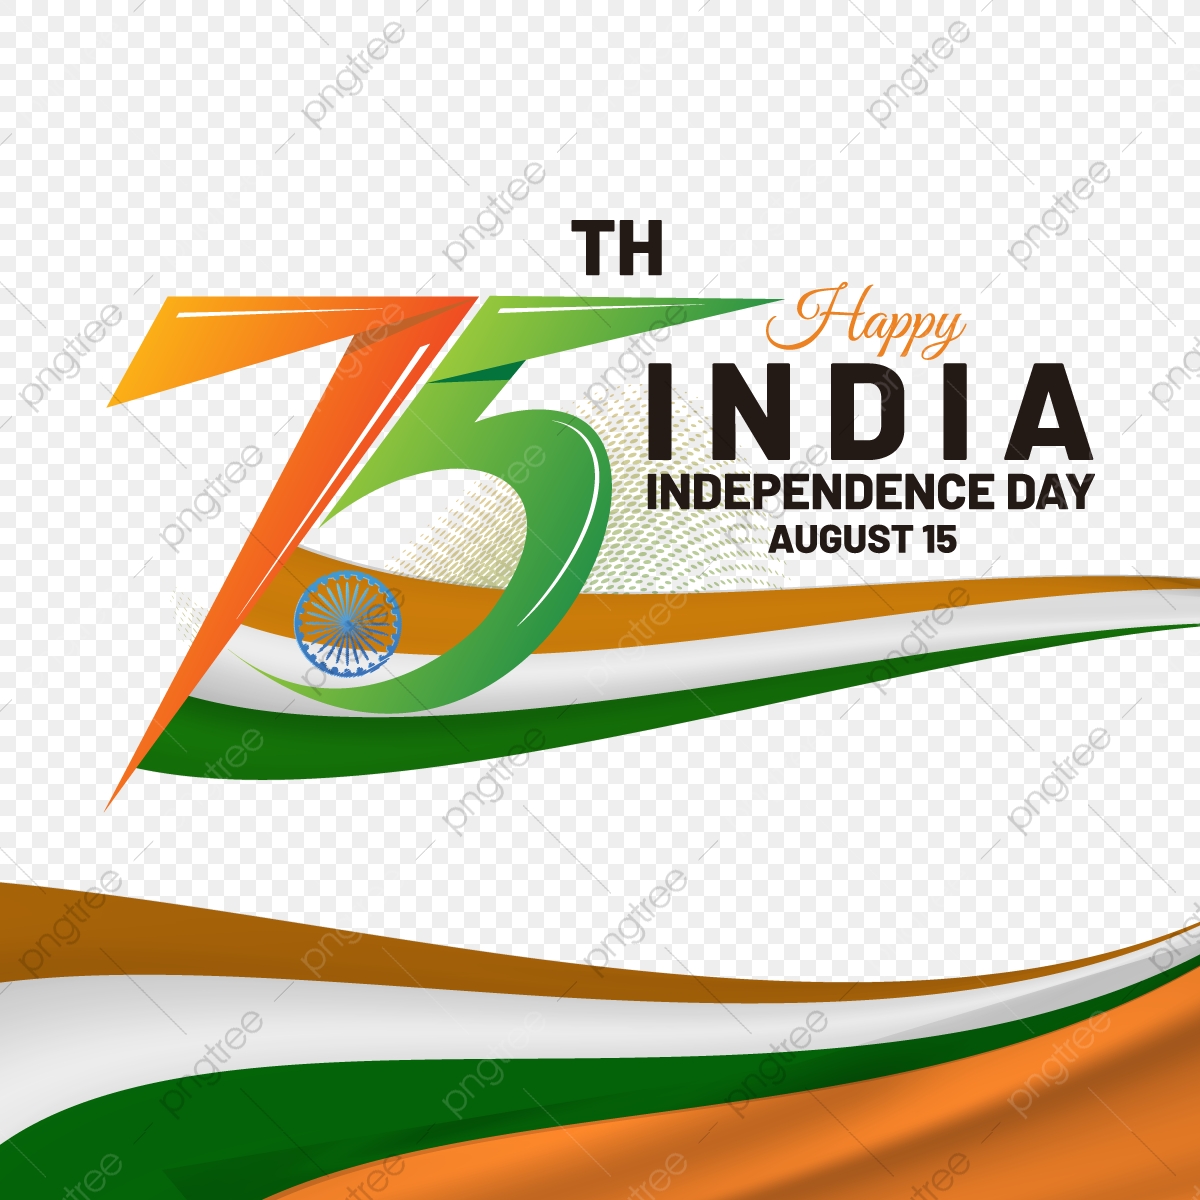 75th Sign Of India Independence Day With Flag Silk Border, Greeting Card, India Day, Shaddow PNG and Vector with Transparent Background for Free Download